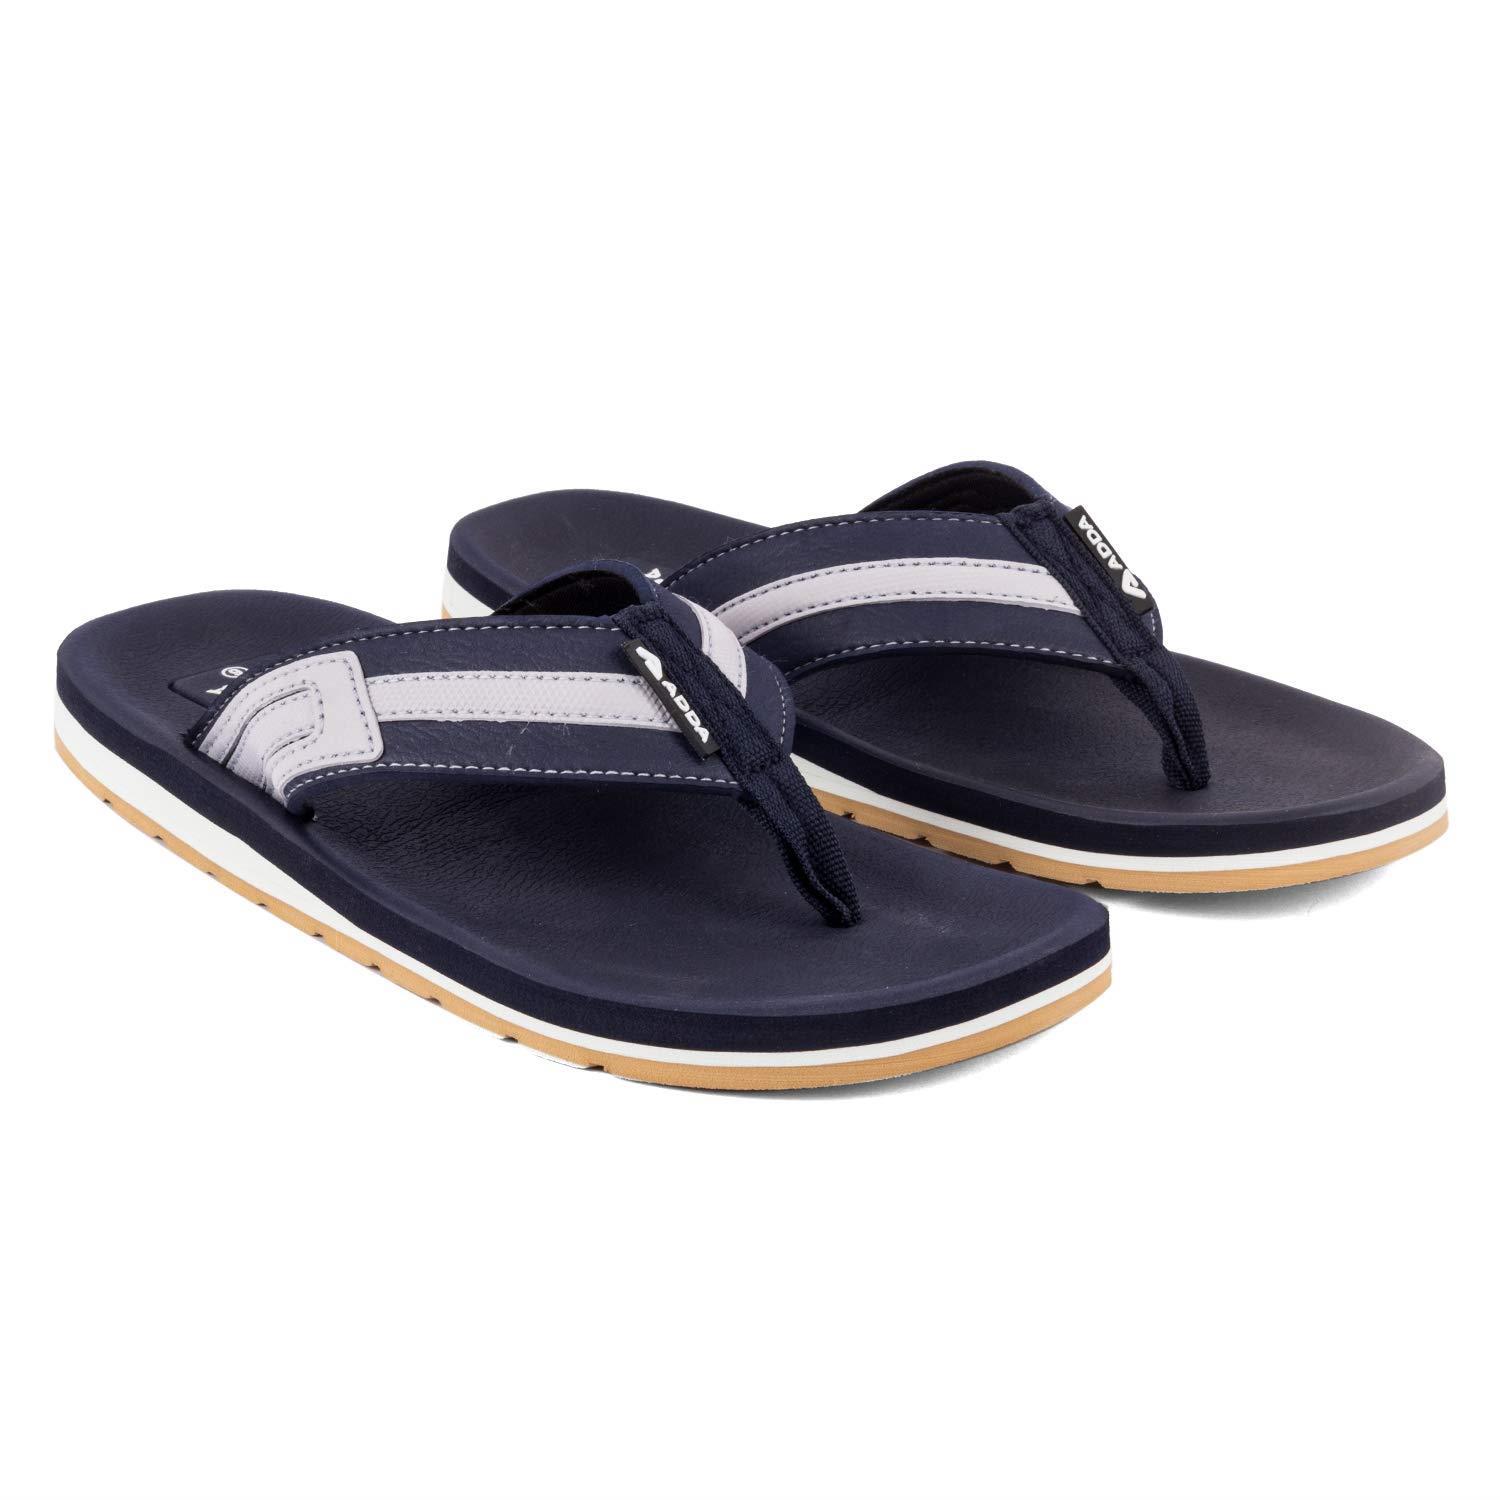 Adda Brand Men's My-Senate-222 New Flipflop Slippers Scoll (Grey) ::  RAJASHOES-tuongthan.vn